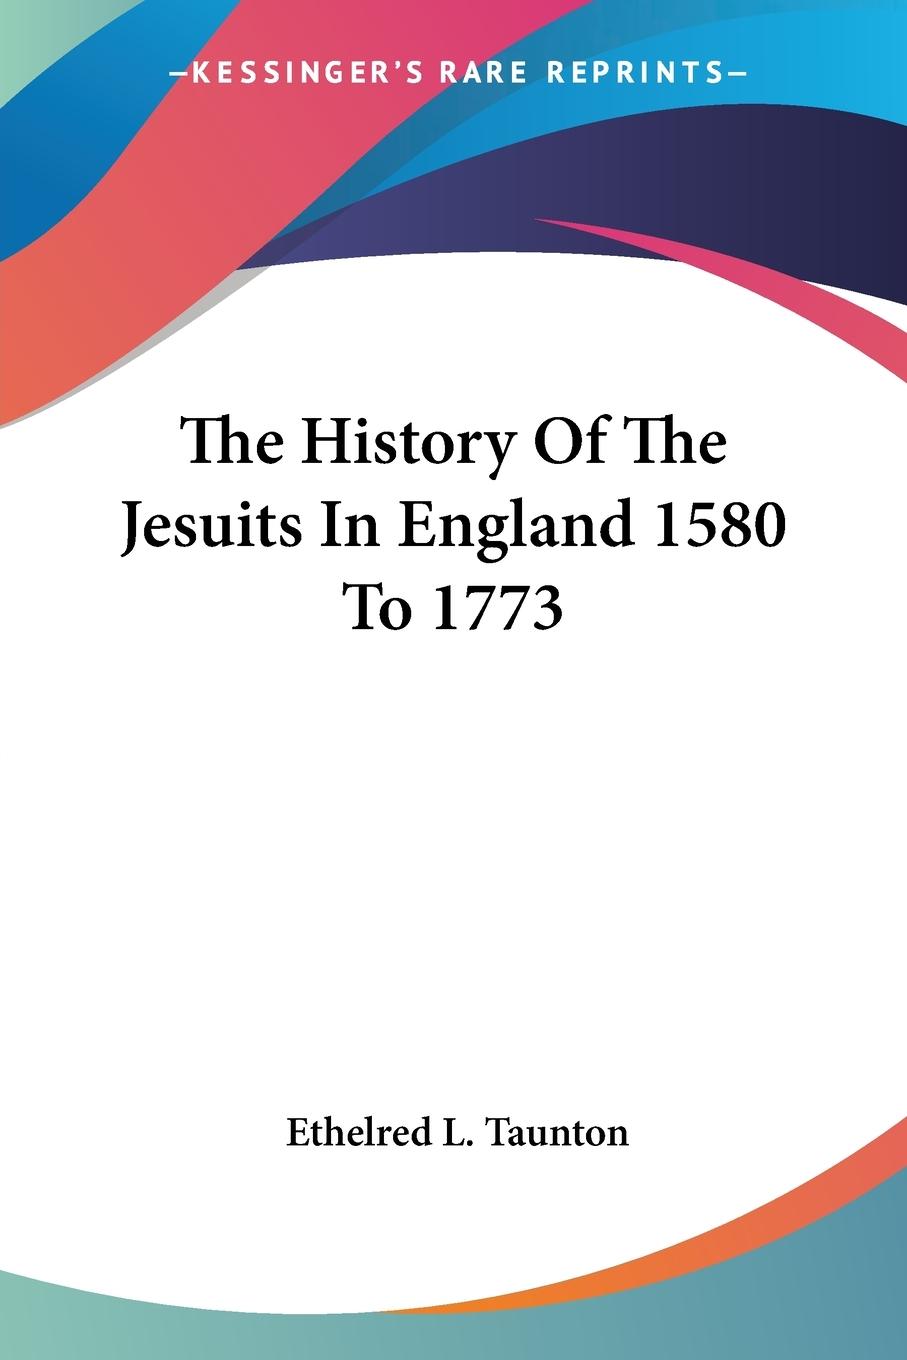 The History Of The Jesuits In England 1580 To 1773 - Taunton, Ethelred L.